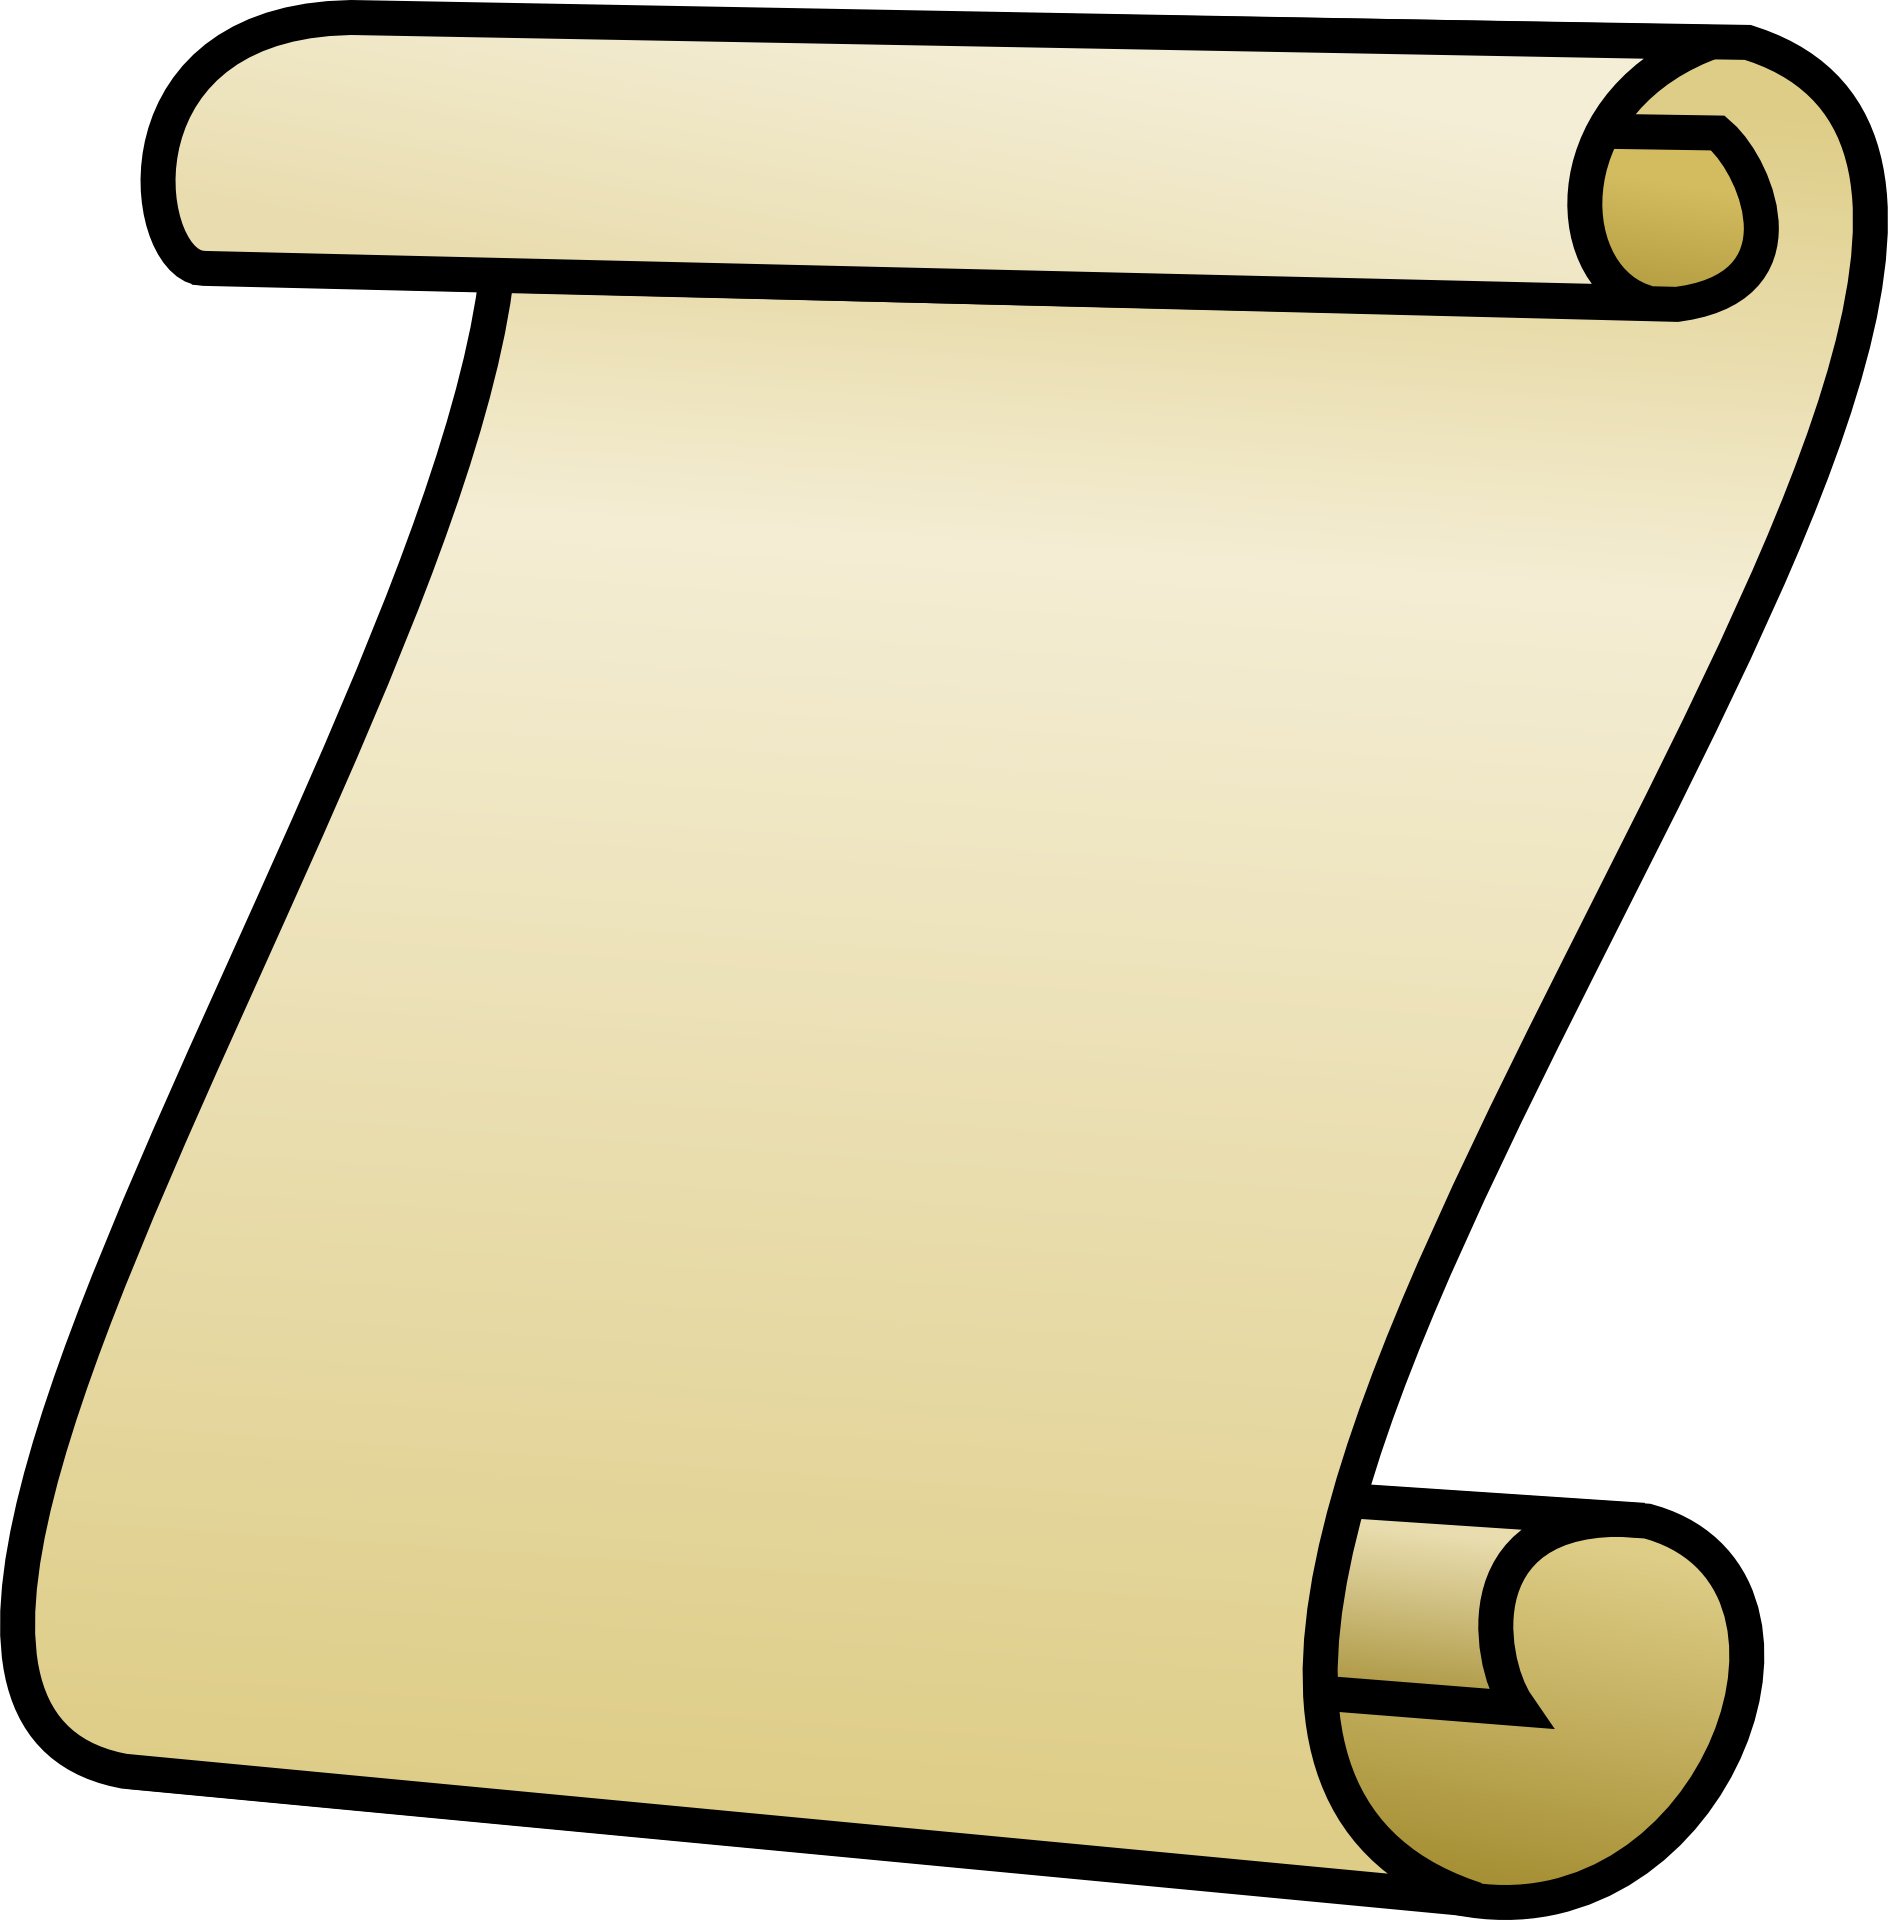 Free Scroll Paper Cliparts, Download Free Clip Art, Free.